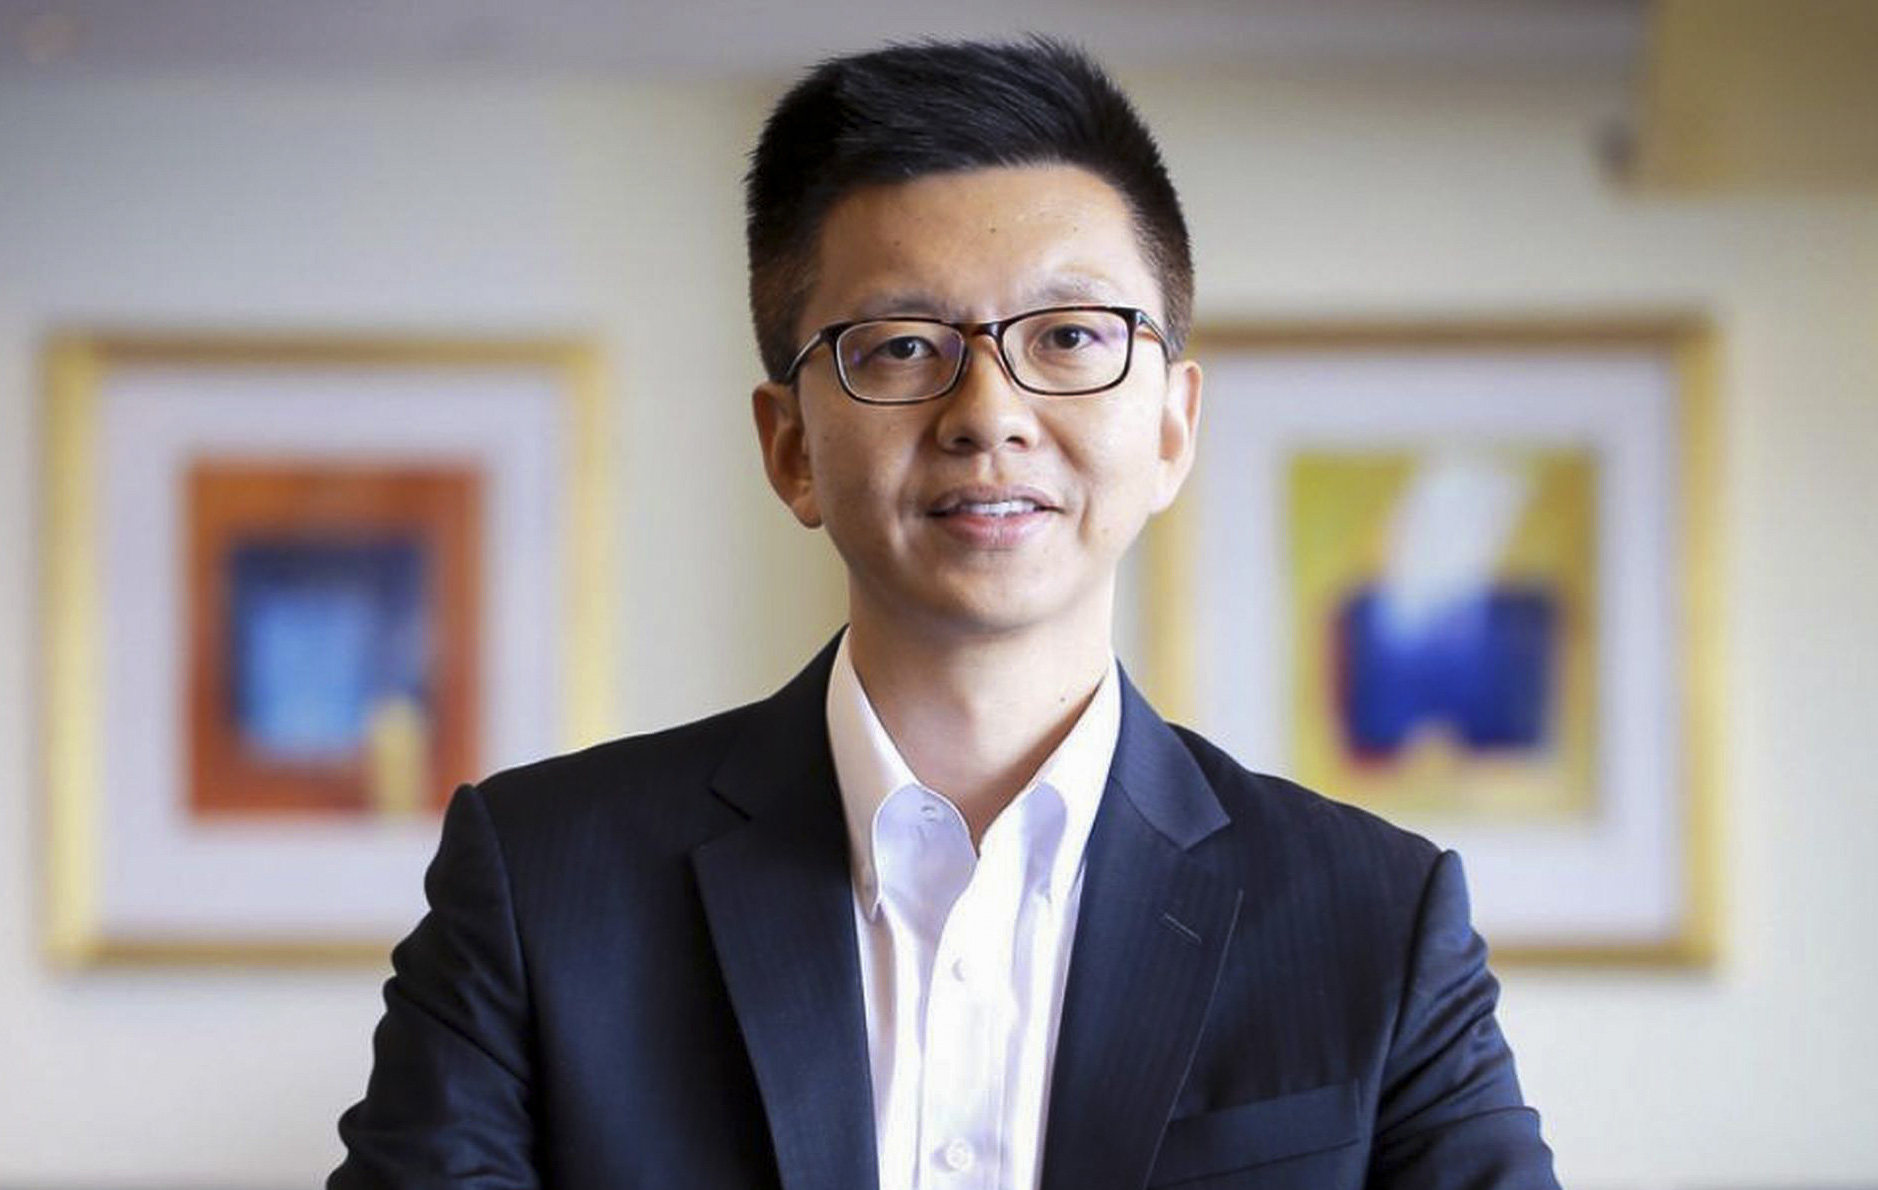 Cathay Pacific Airways has appointed Ronald Lam as CEO. Photo: Facebook